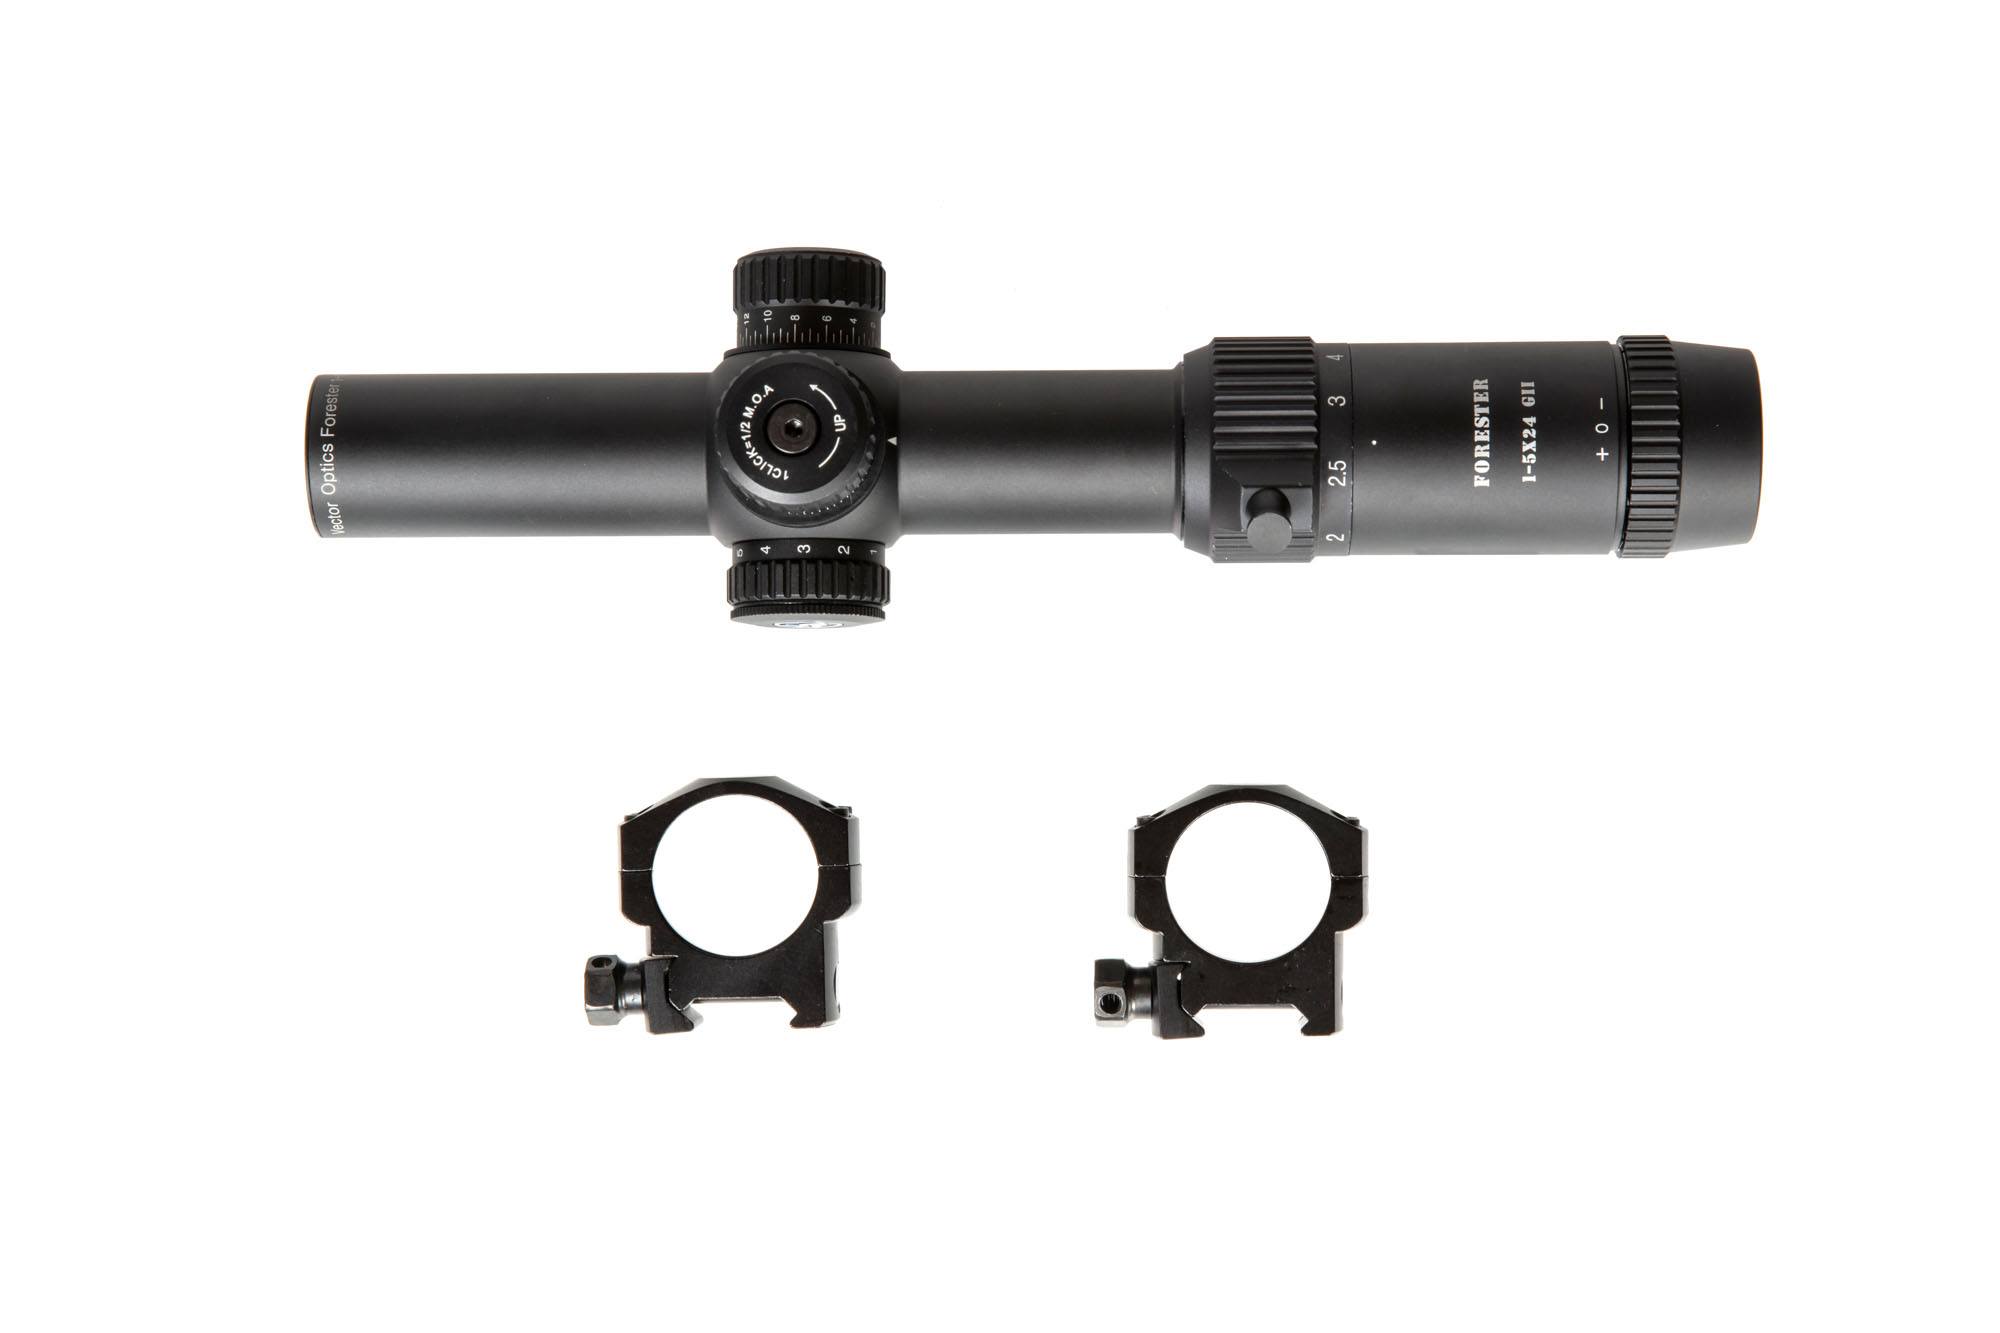 Tactical Scope Forester 1-5x24 GenII